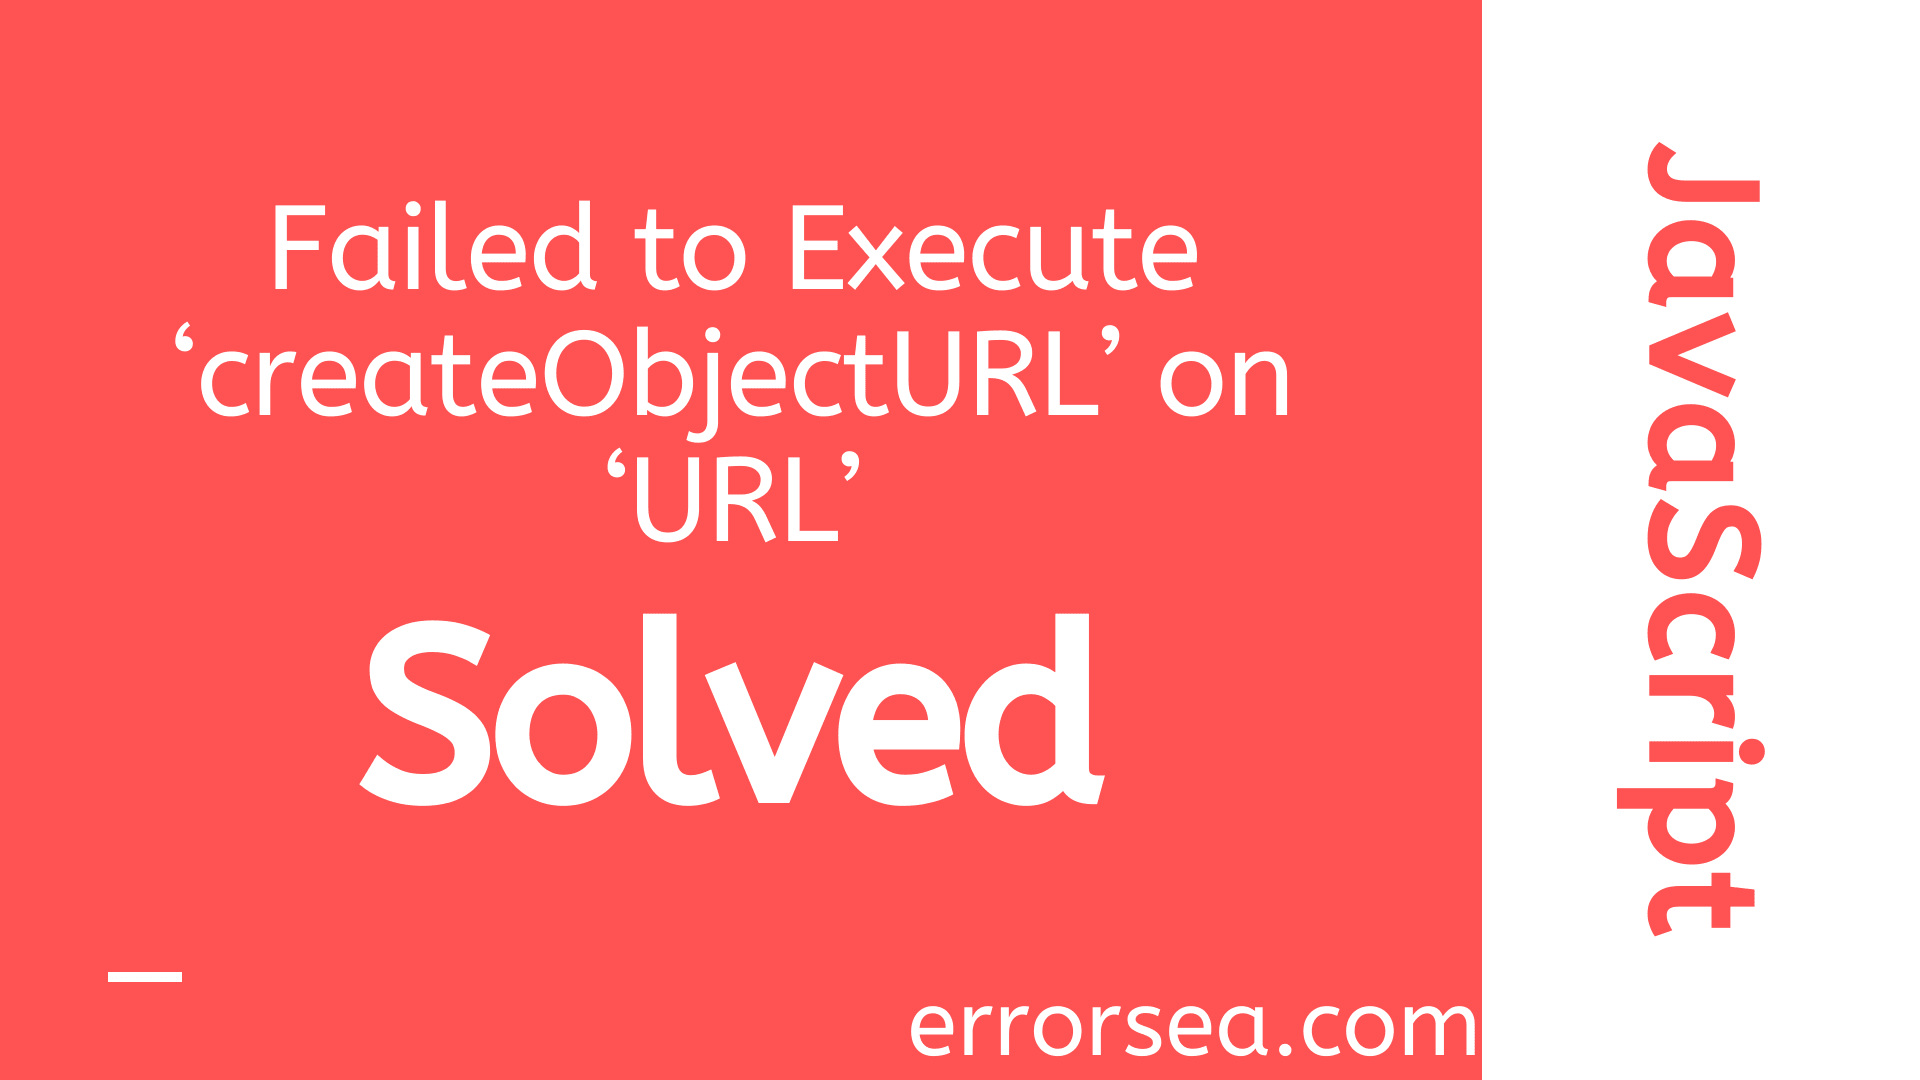 [Solved] Uncaught TypeError: Failed to Execute ‘createObjectURL’ on ‘URL’: No Function Was Found That Matched the Signature Provided